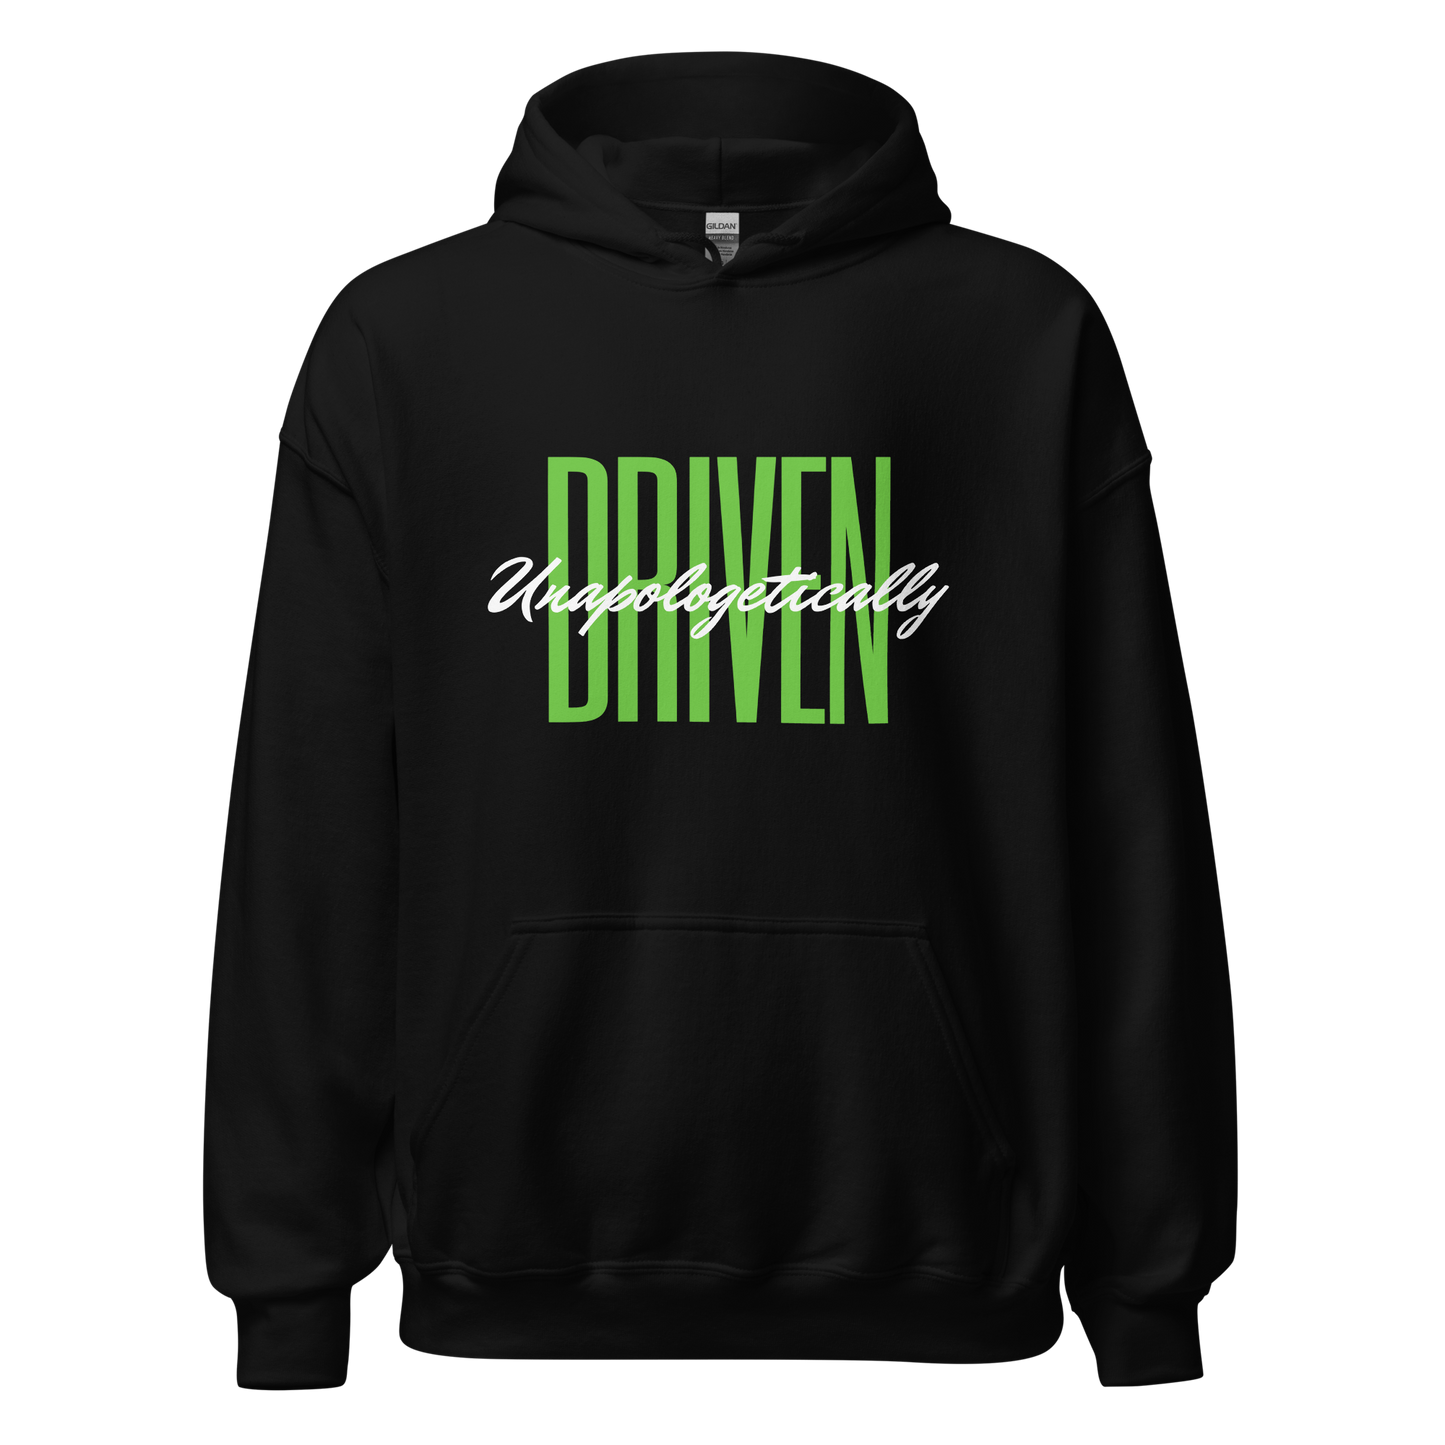 Unapologetically Driven Hoodie